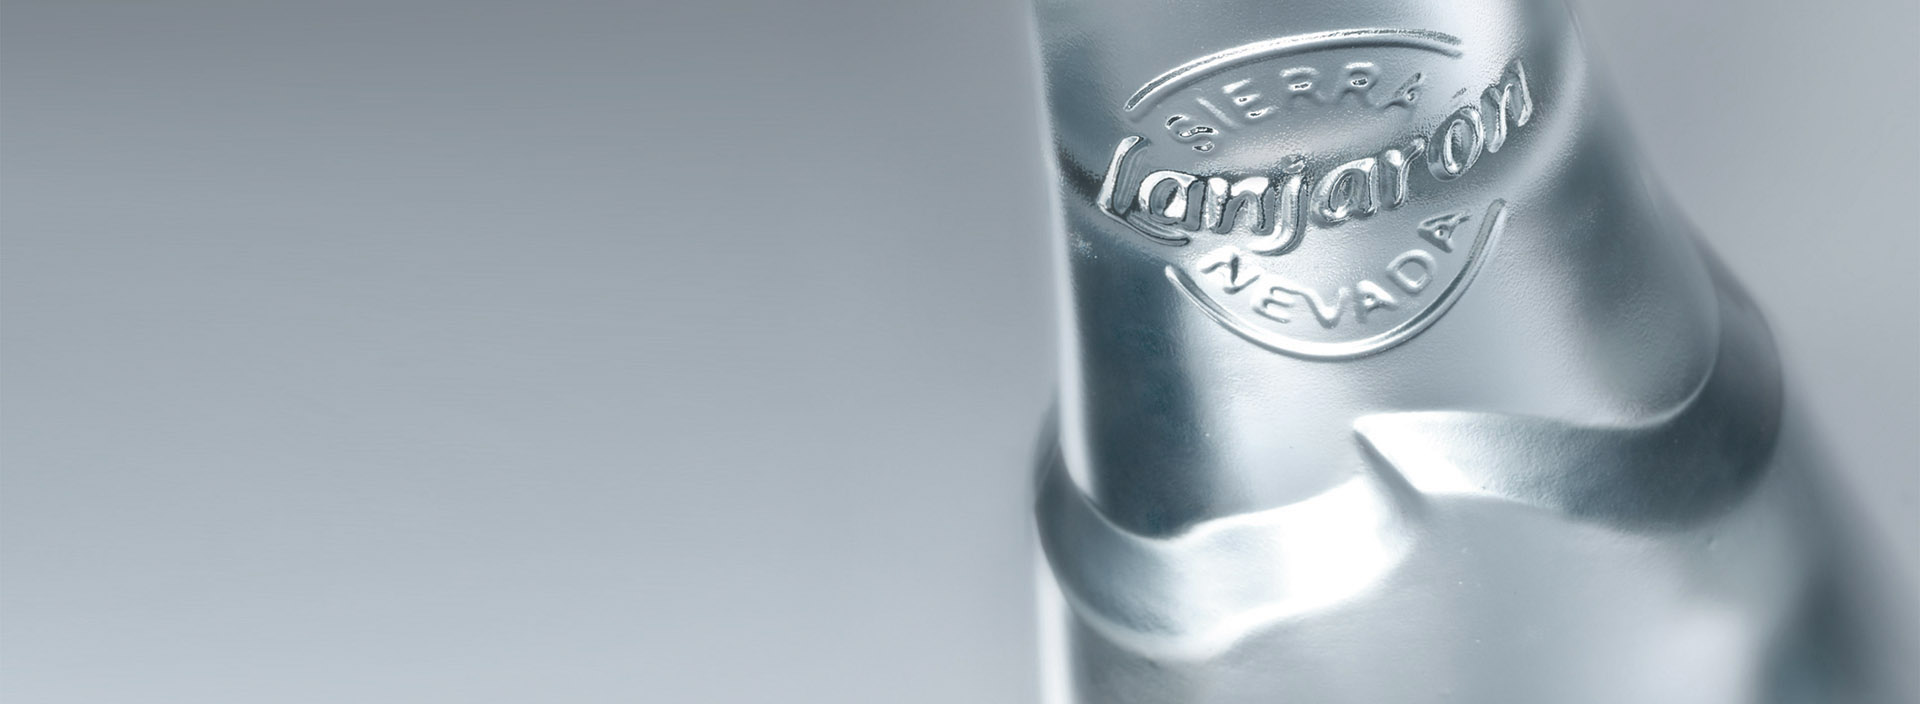 Design detail of a glass bottle for restaurants and catering.